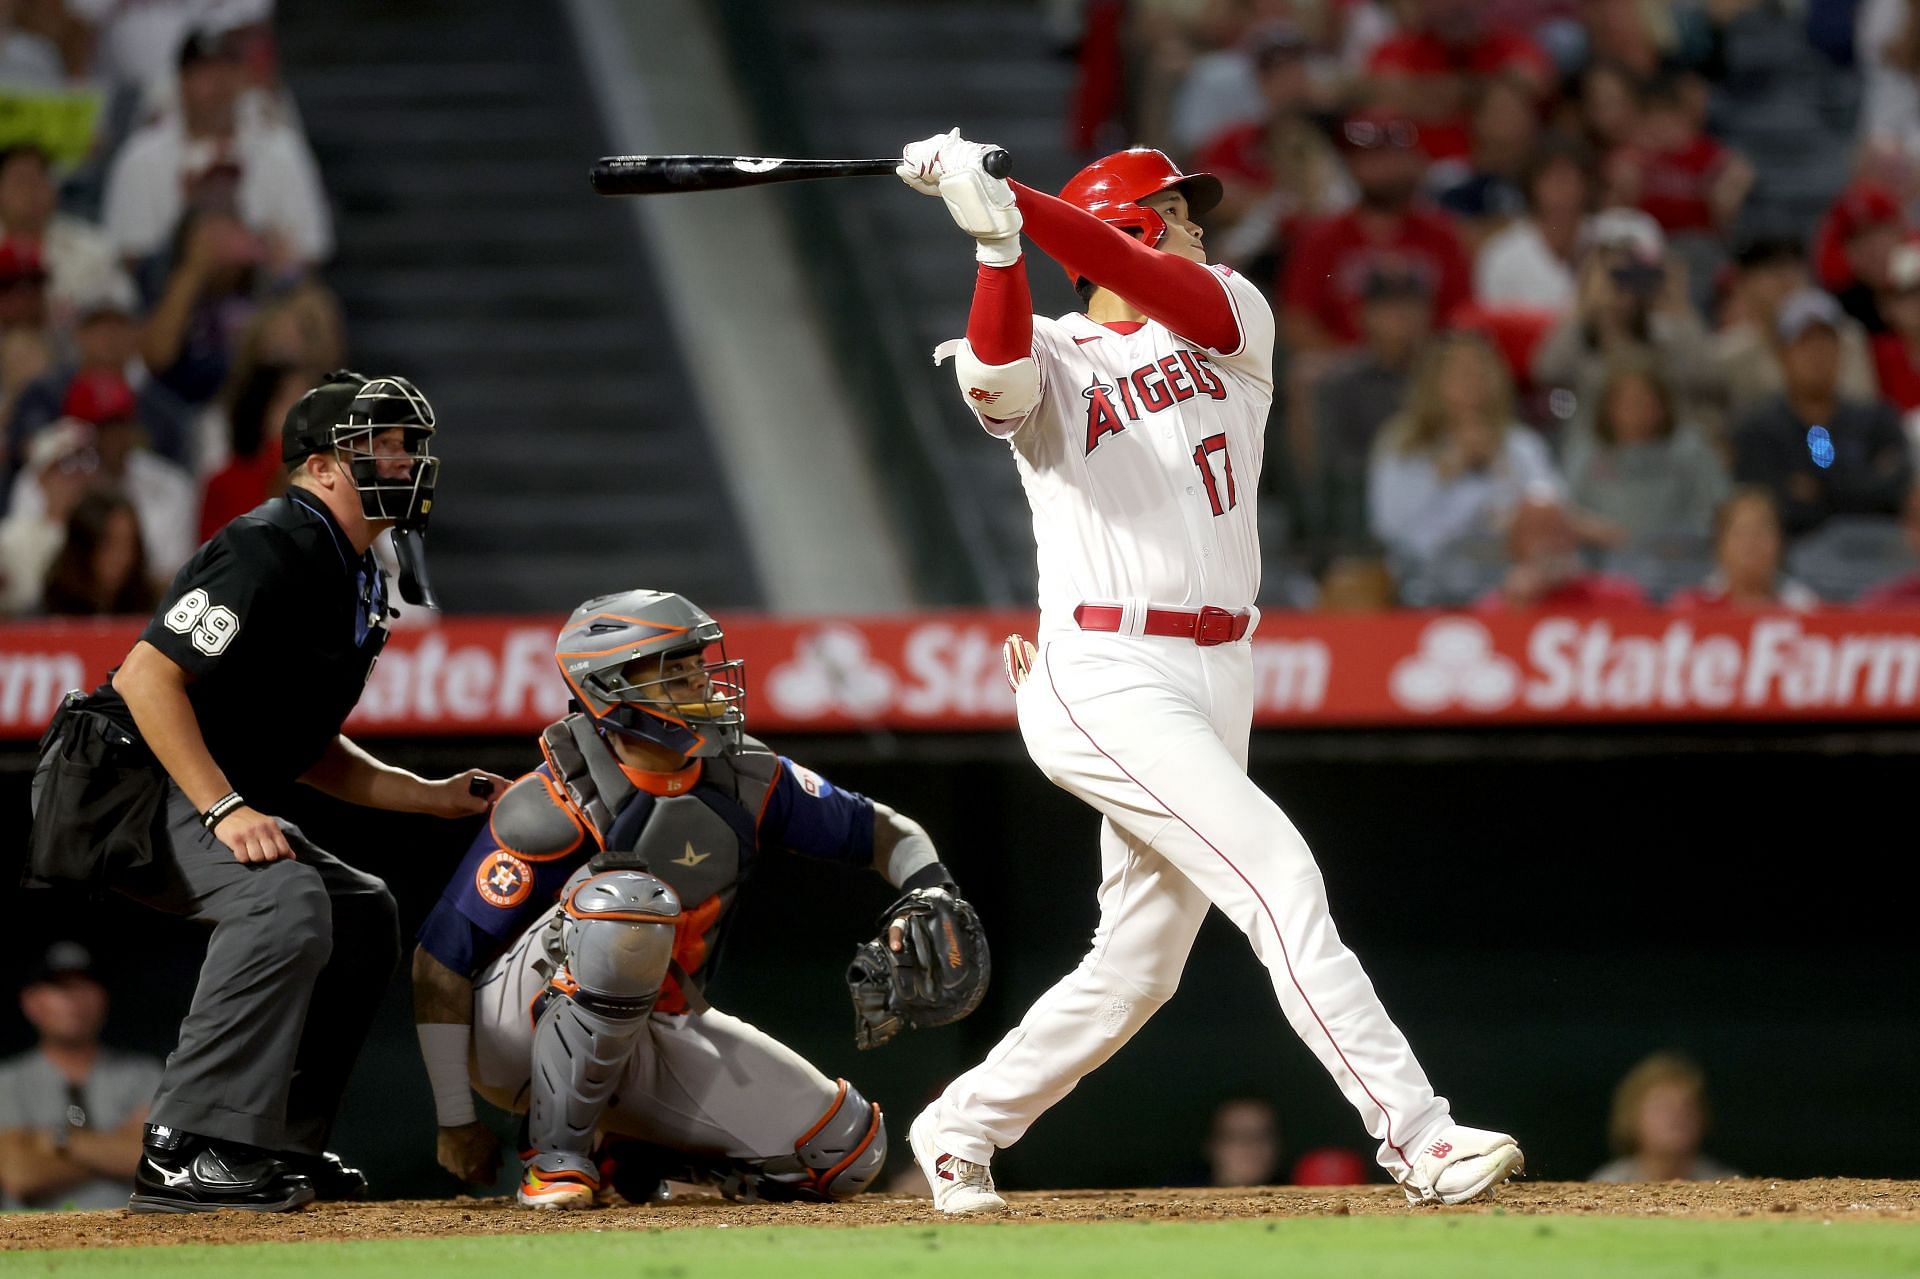 Shohei Ohtani of the Los Angeles Angels connects for a home run at Angel Stadium of Anaheim